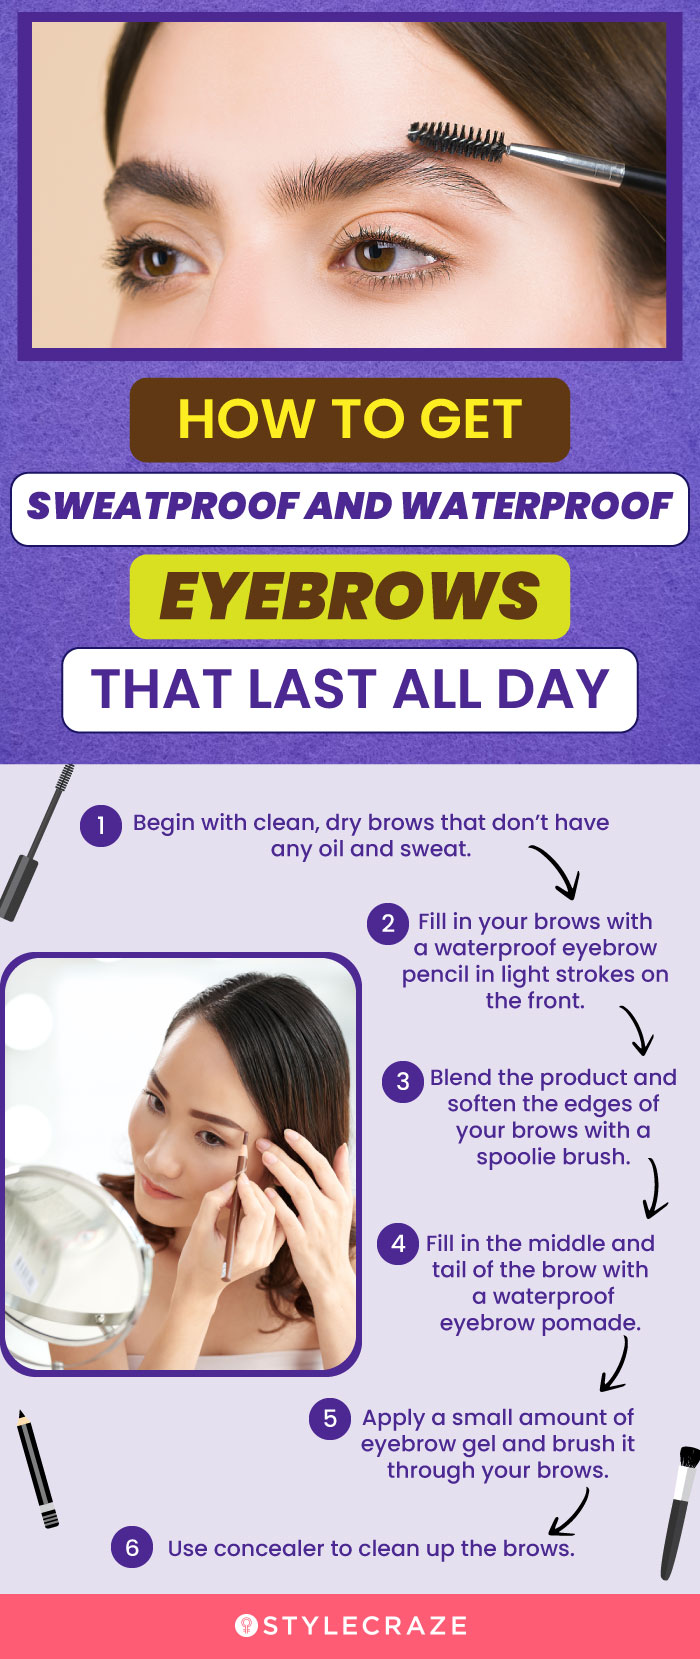 How To Get Sweatproof And Waterproof Eyebrows That Last All Day (infographic)